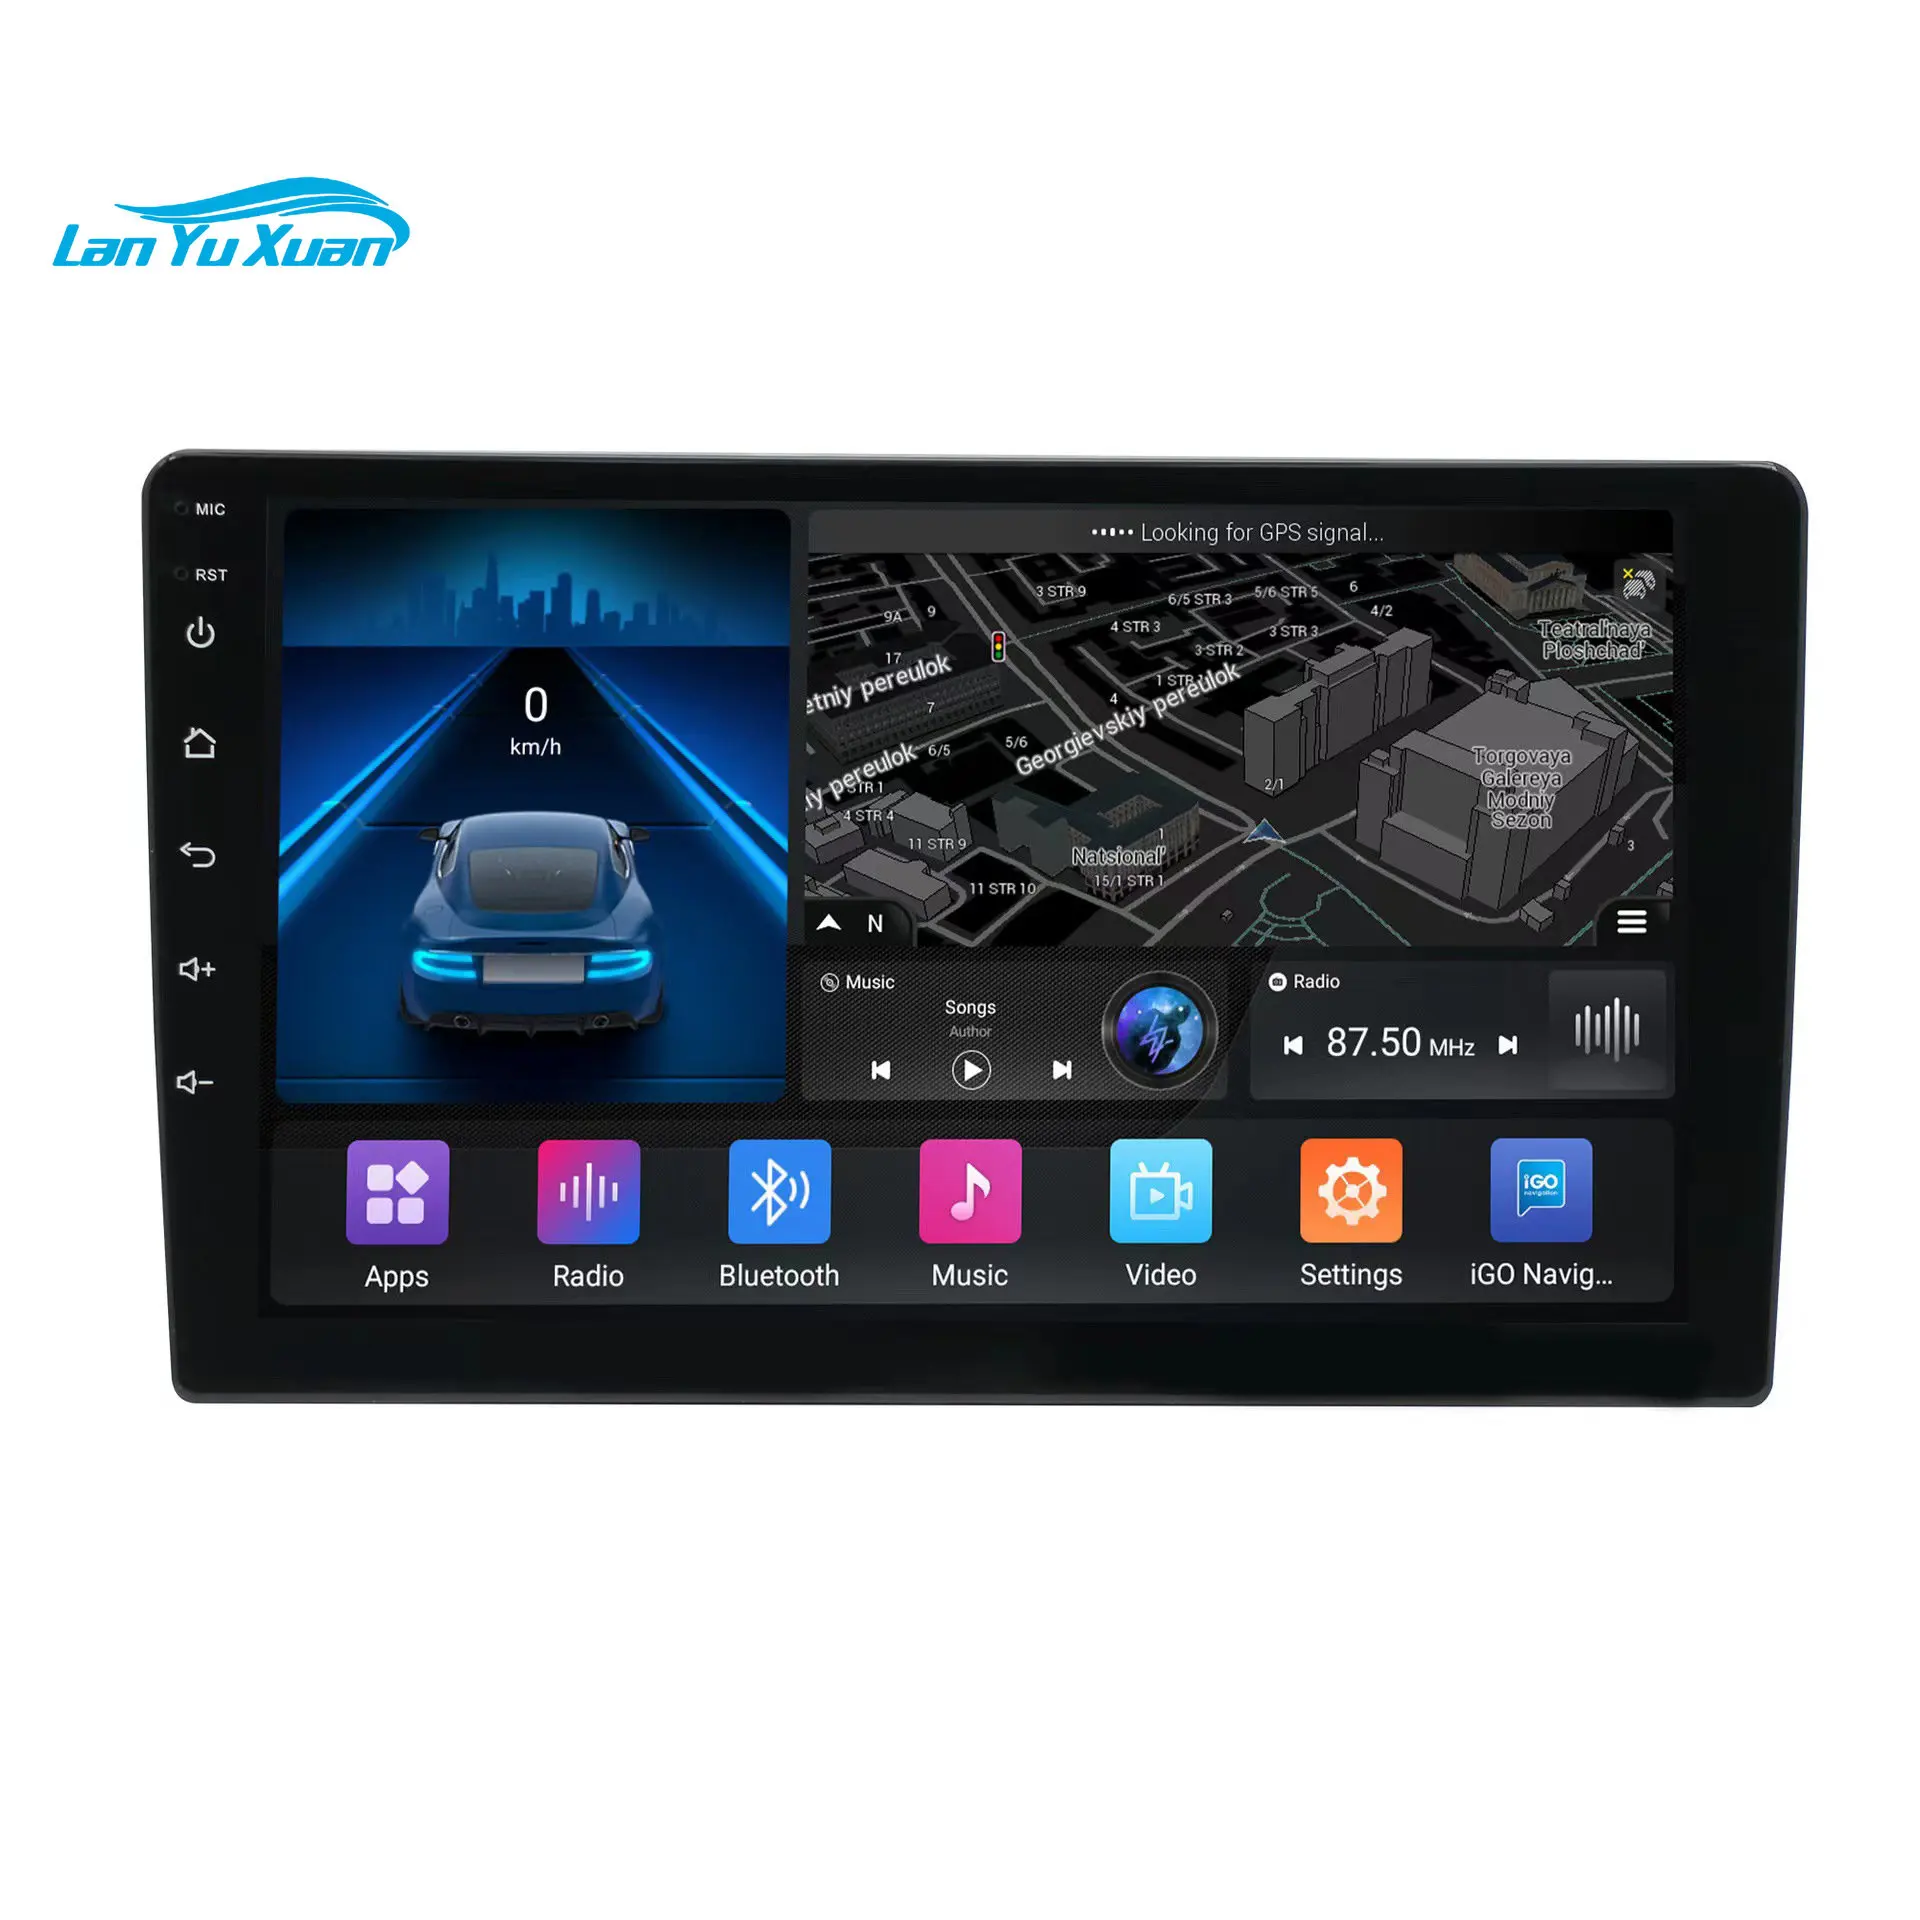 Touch Screen 9inch 10inch 12.3 inch 4G WIFI GPS Stereo Radio Navigation System o Auto mp5 player for car n6 7in multi language car bt mp5 player auto touched screen car audio and video player auto multi media player radio receiver